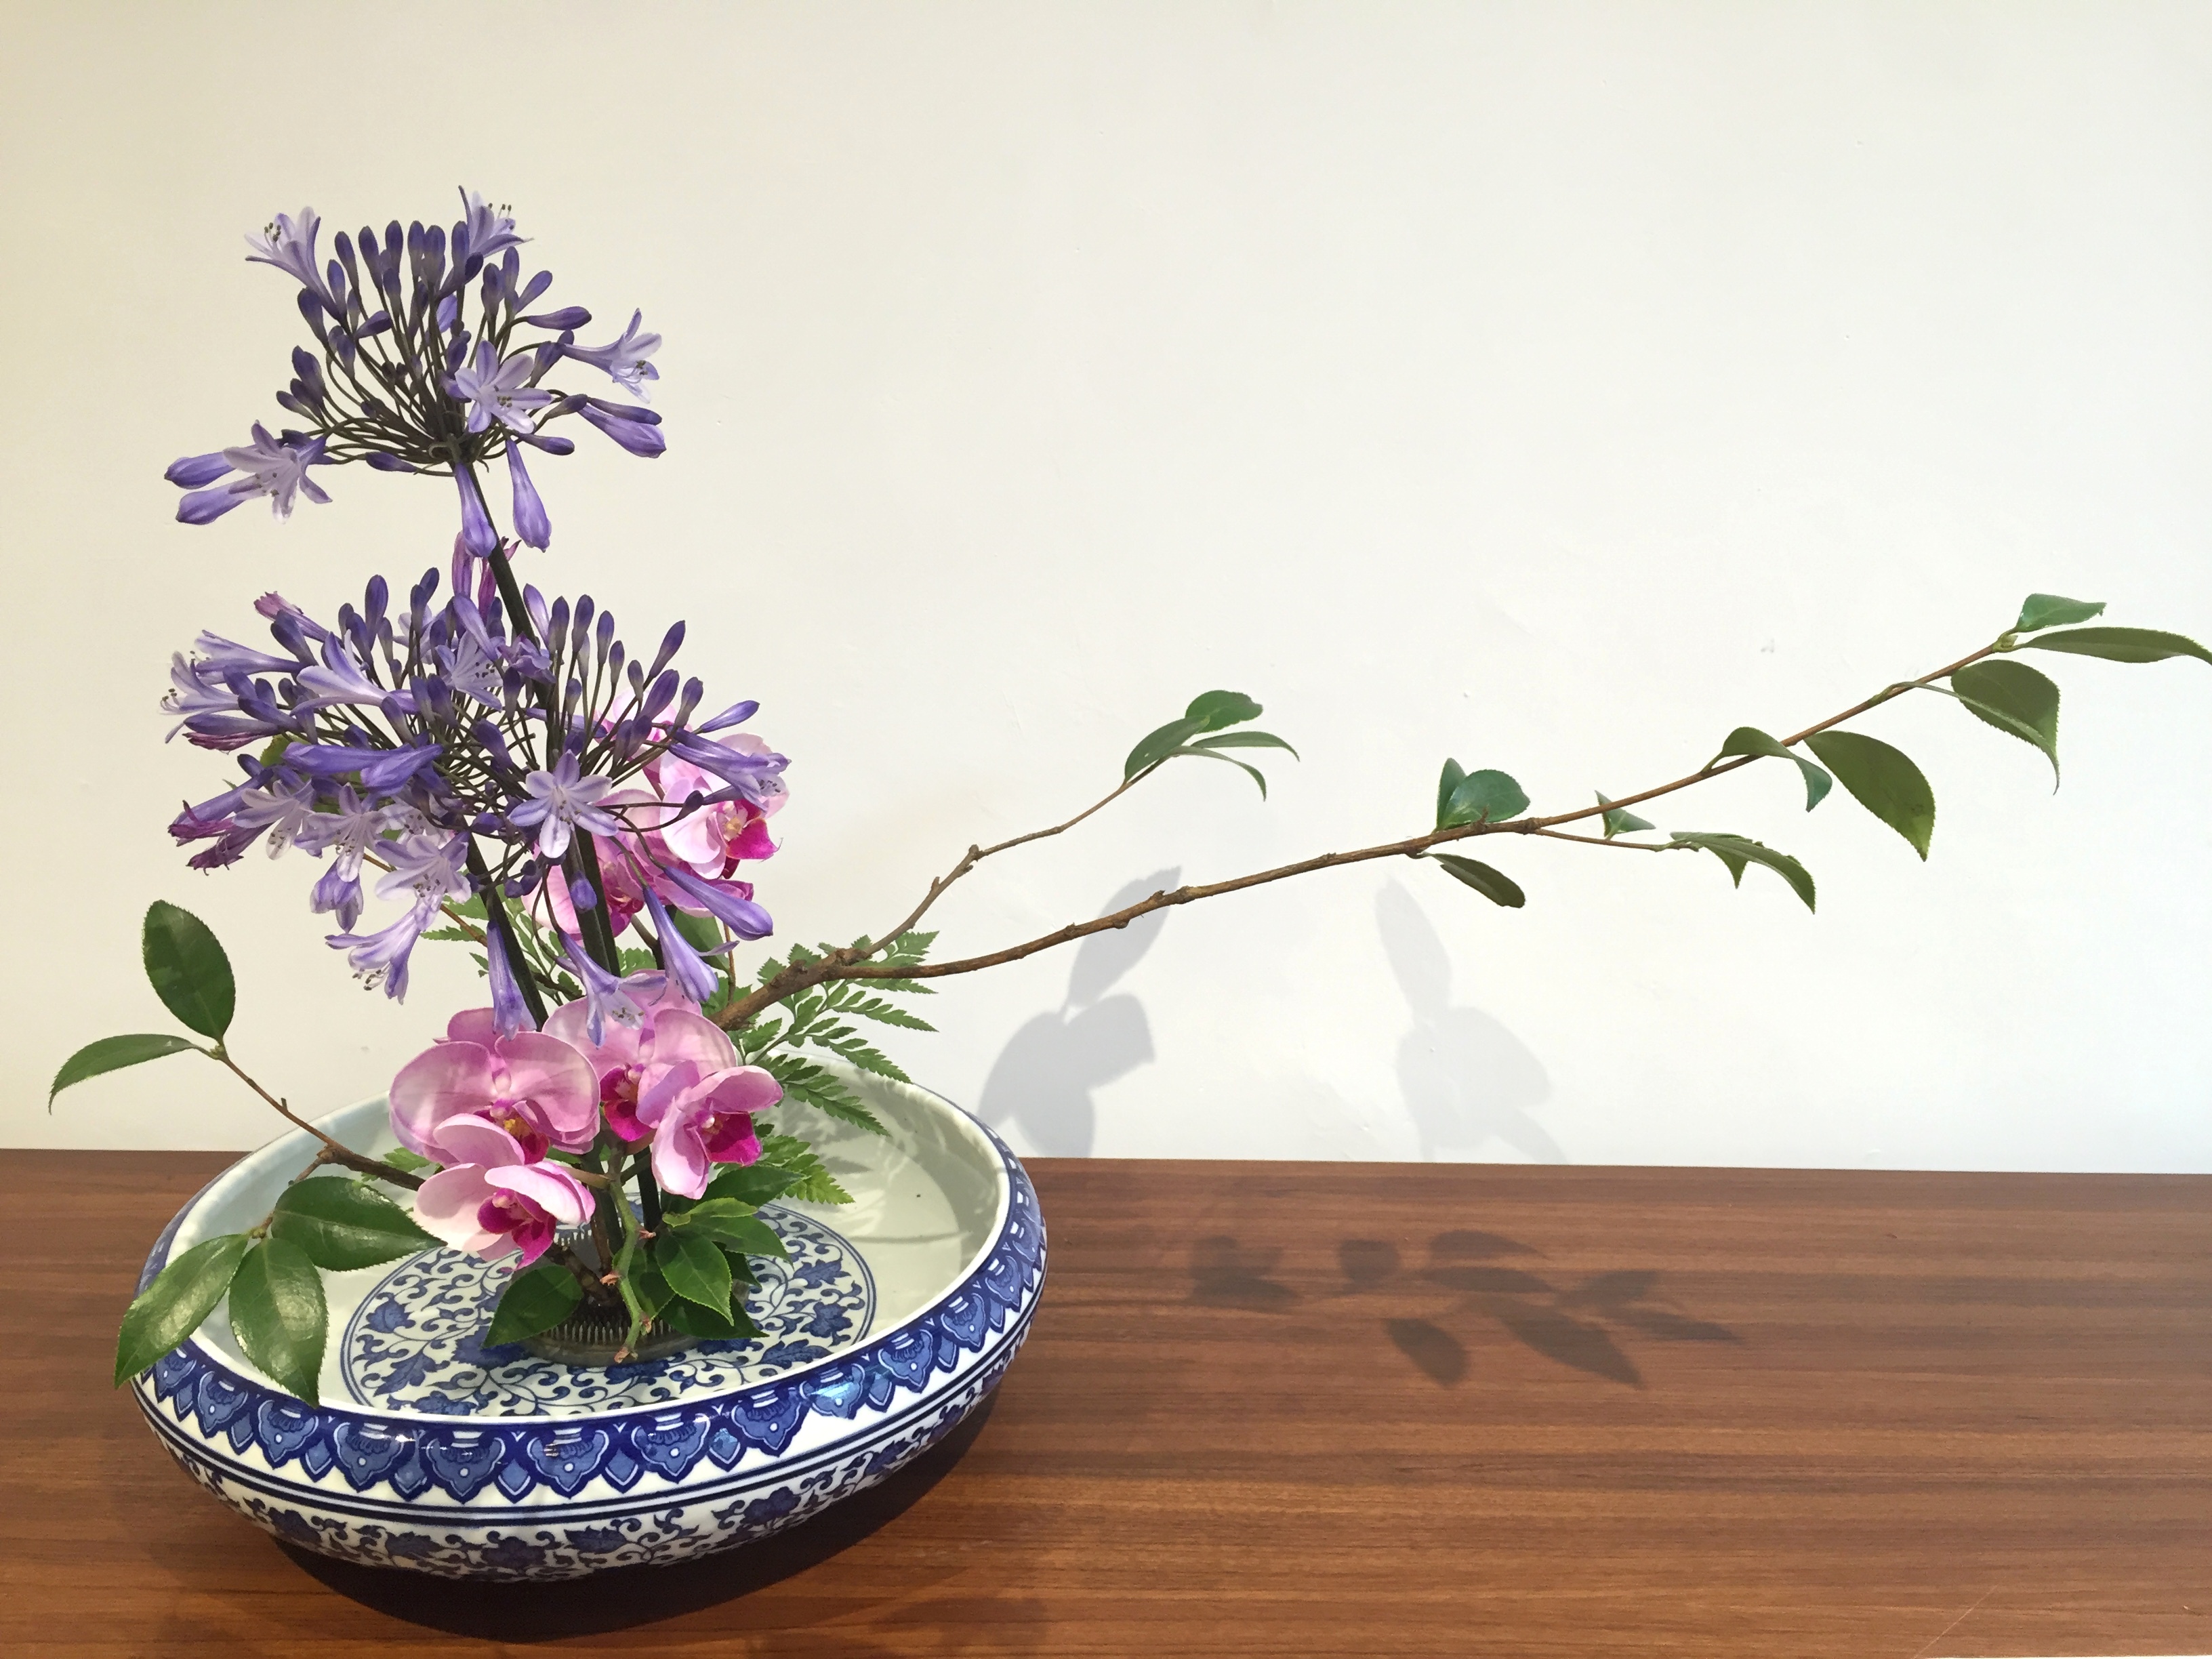 Free photo: Chinese Flower Arrangement - Anther, Petals, Varied - Free